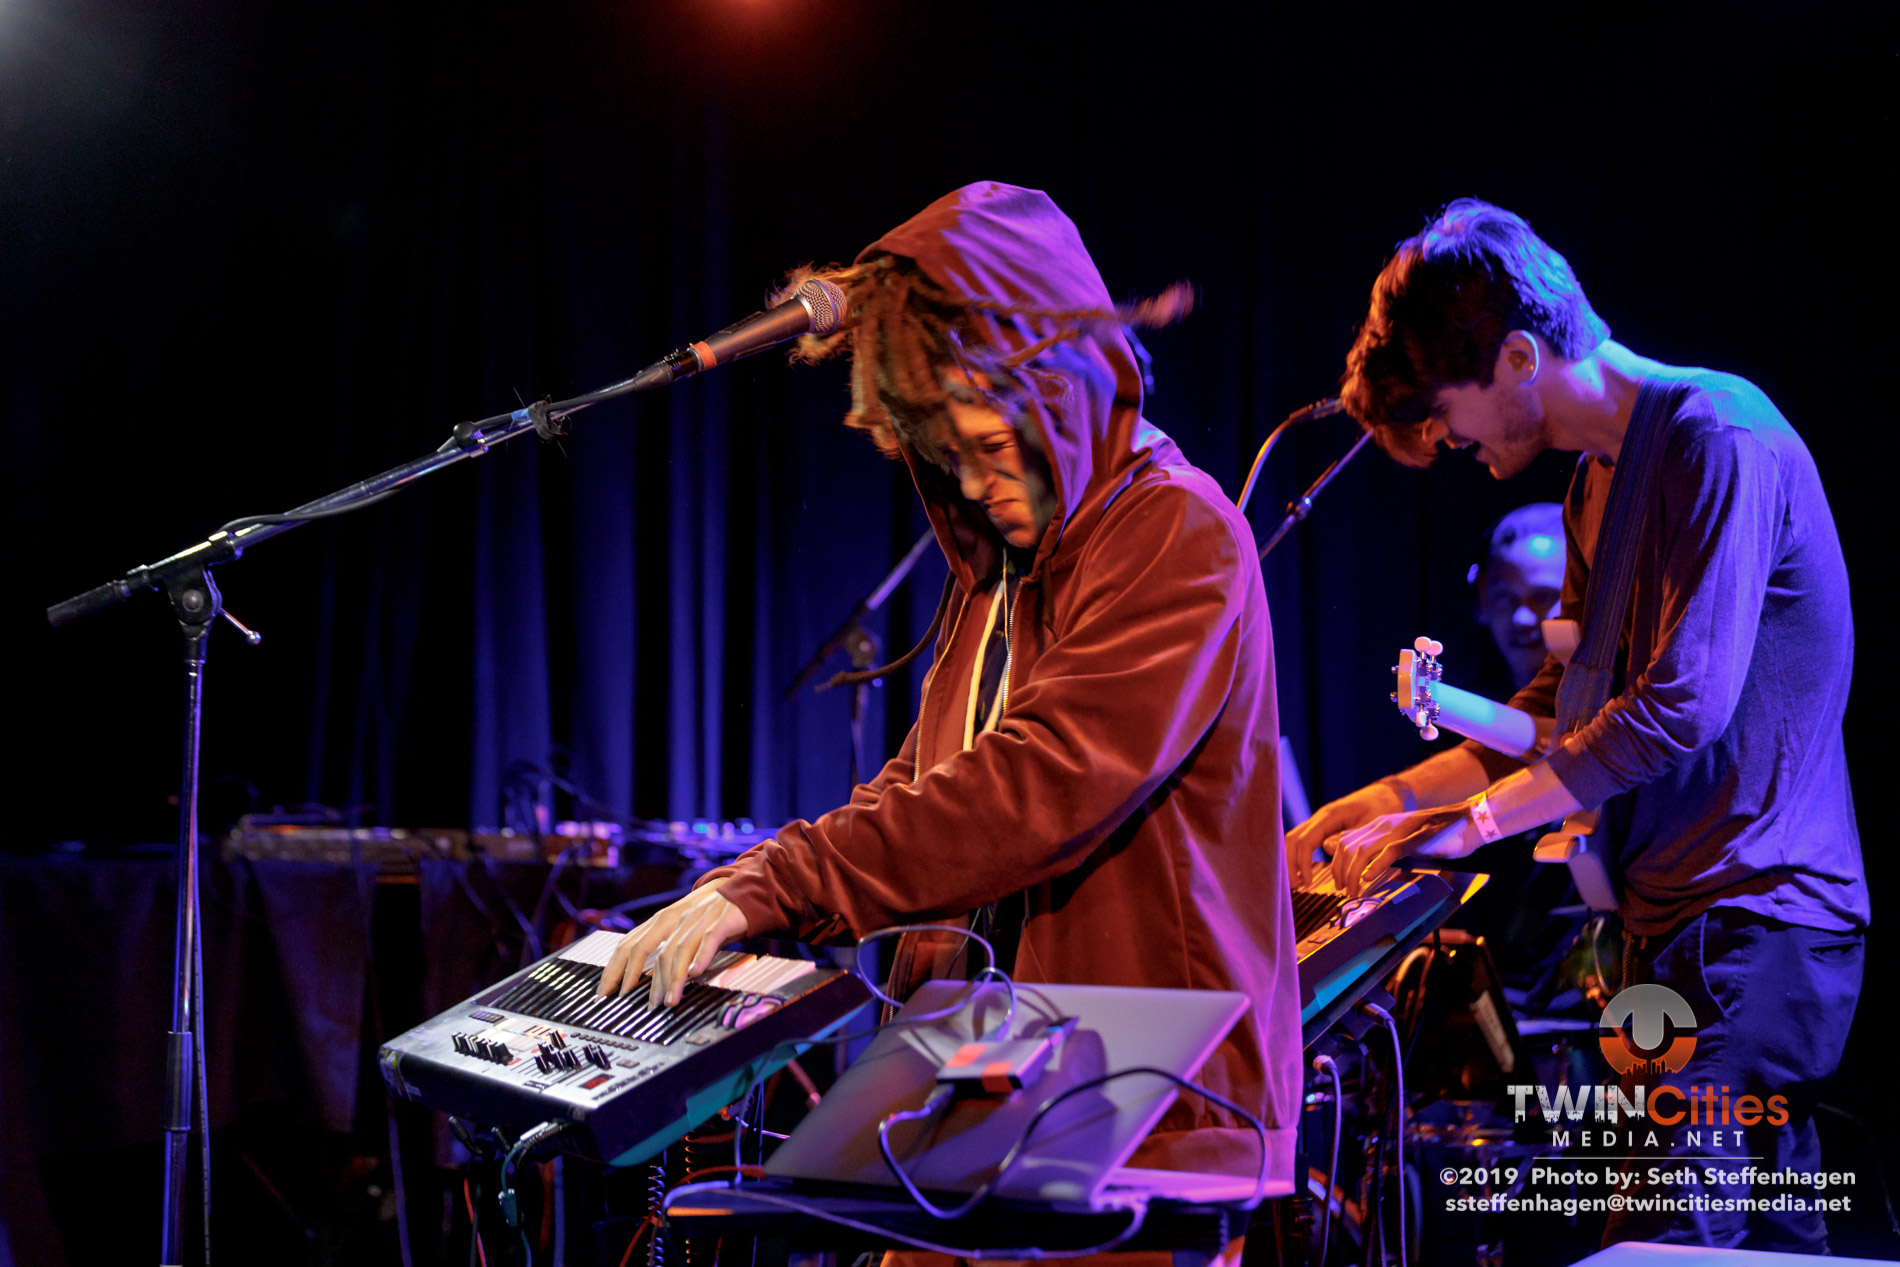 October 2, 2019 - Minneapolis, Minnesota, United States -  altopalo  live in concert at 7th Street Entry  opening for Cosmo Sheldrake.

(Photo by Seth Steffenhagen/Steffenhagen Photography)